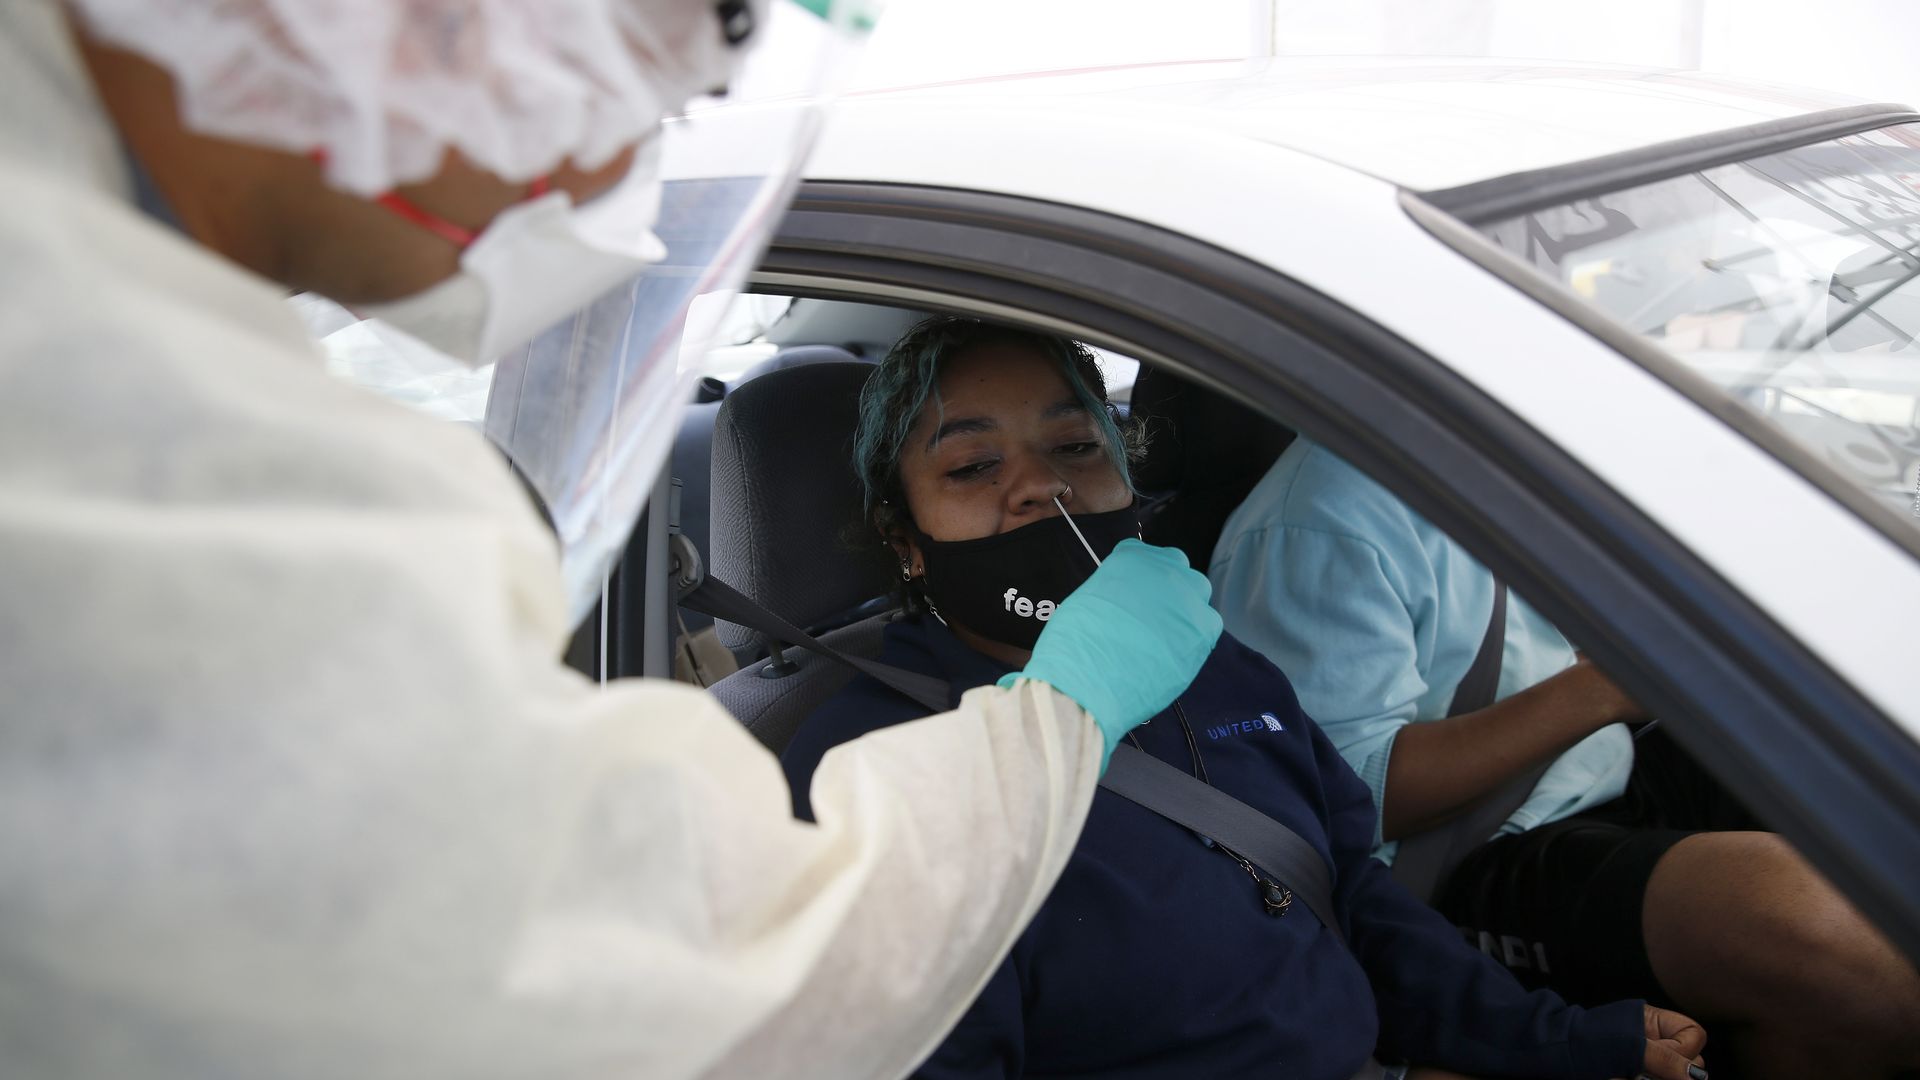  Dr. Faiz Ansari gives Emani Vaughn a COVID-19 test at the Clínica de La Raza testing site along East 12th Street and Derby Avenue in Oakland, Calif., 